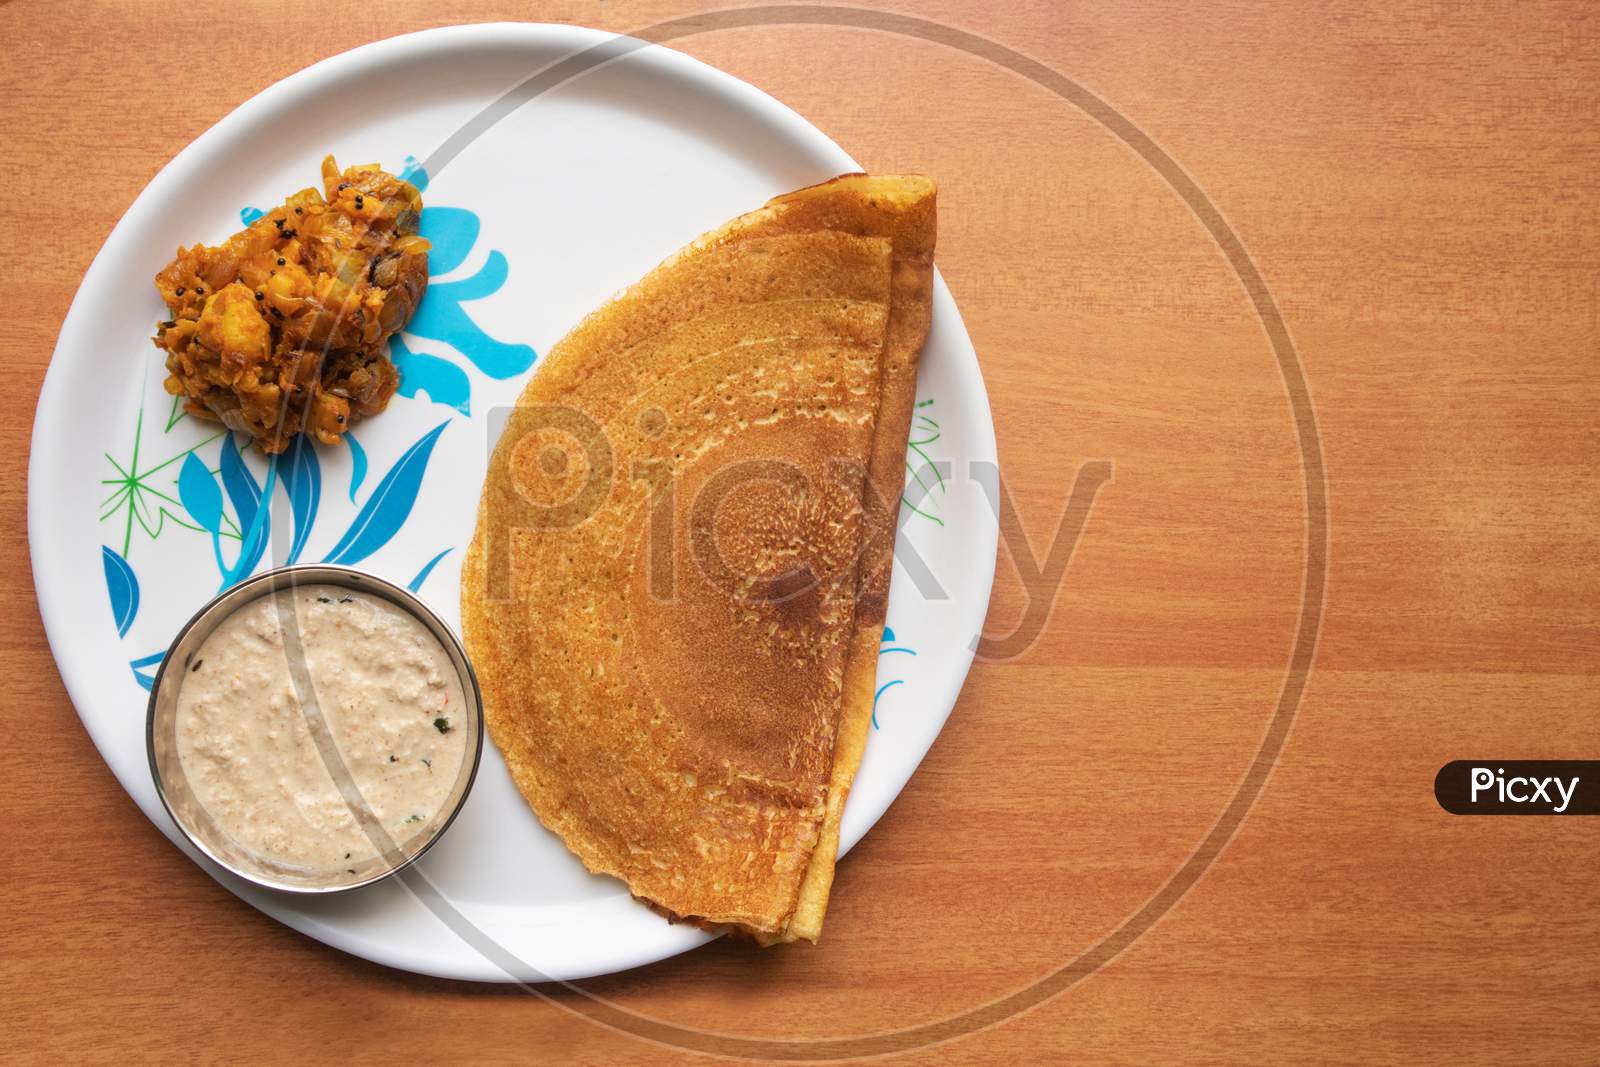 Maida Dosa With Coconut Chutney And Potato Or Aloo Currey In Plate